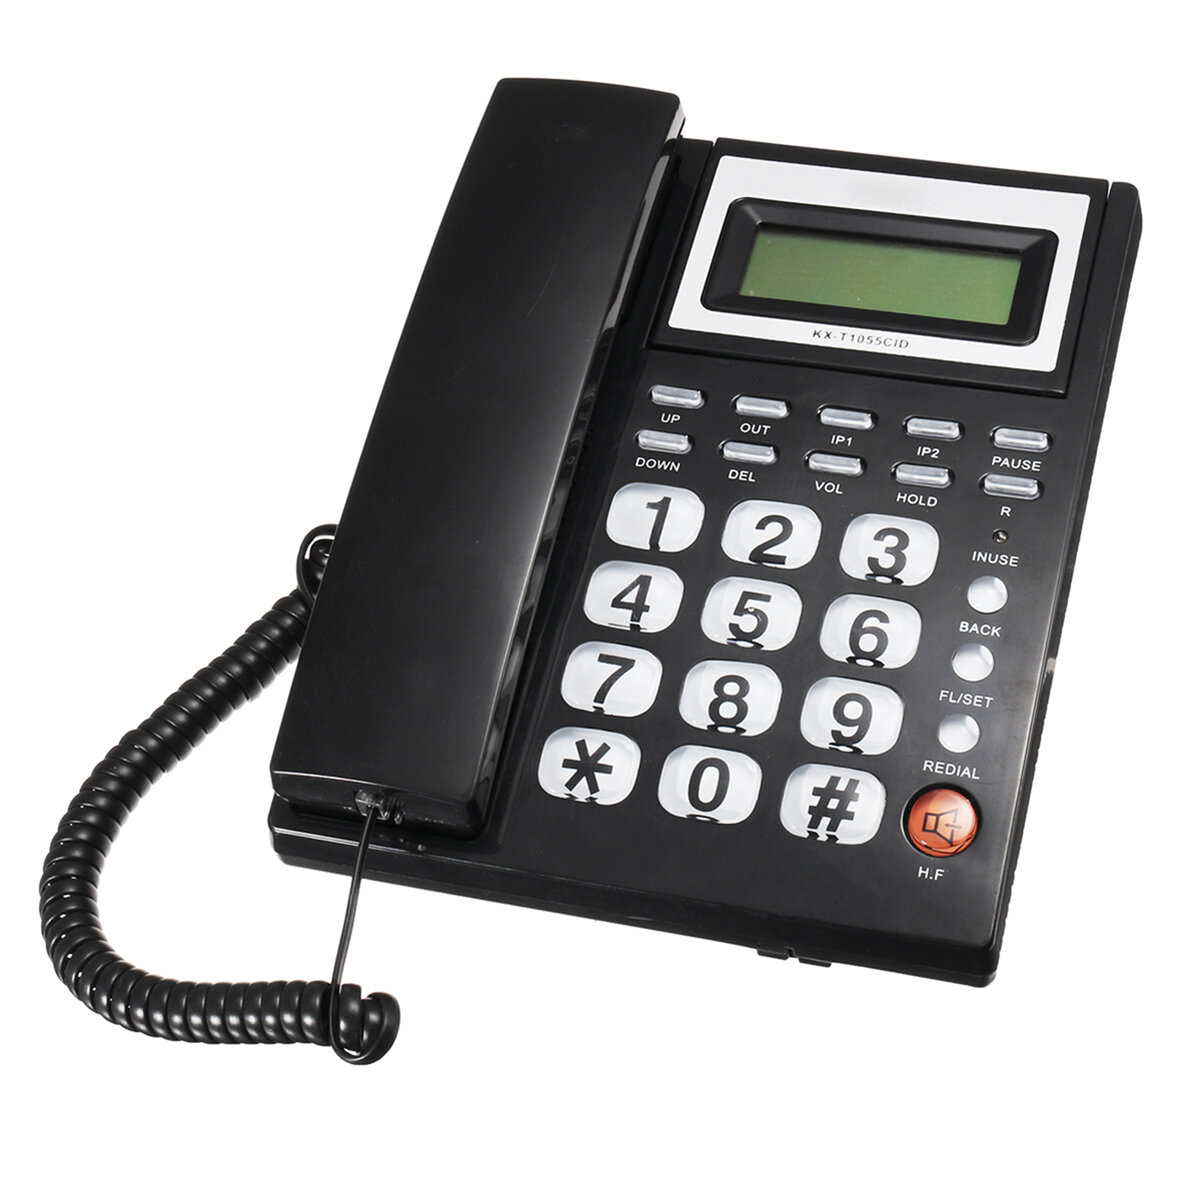 

Desktop Landline Phone Fixed Telephone FSK/DTMF Caller ID Corded Phone Compatible with LCD Screen for Home Office Hotels